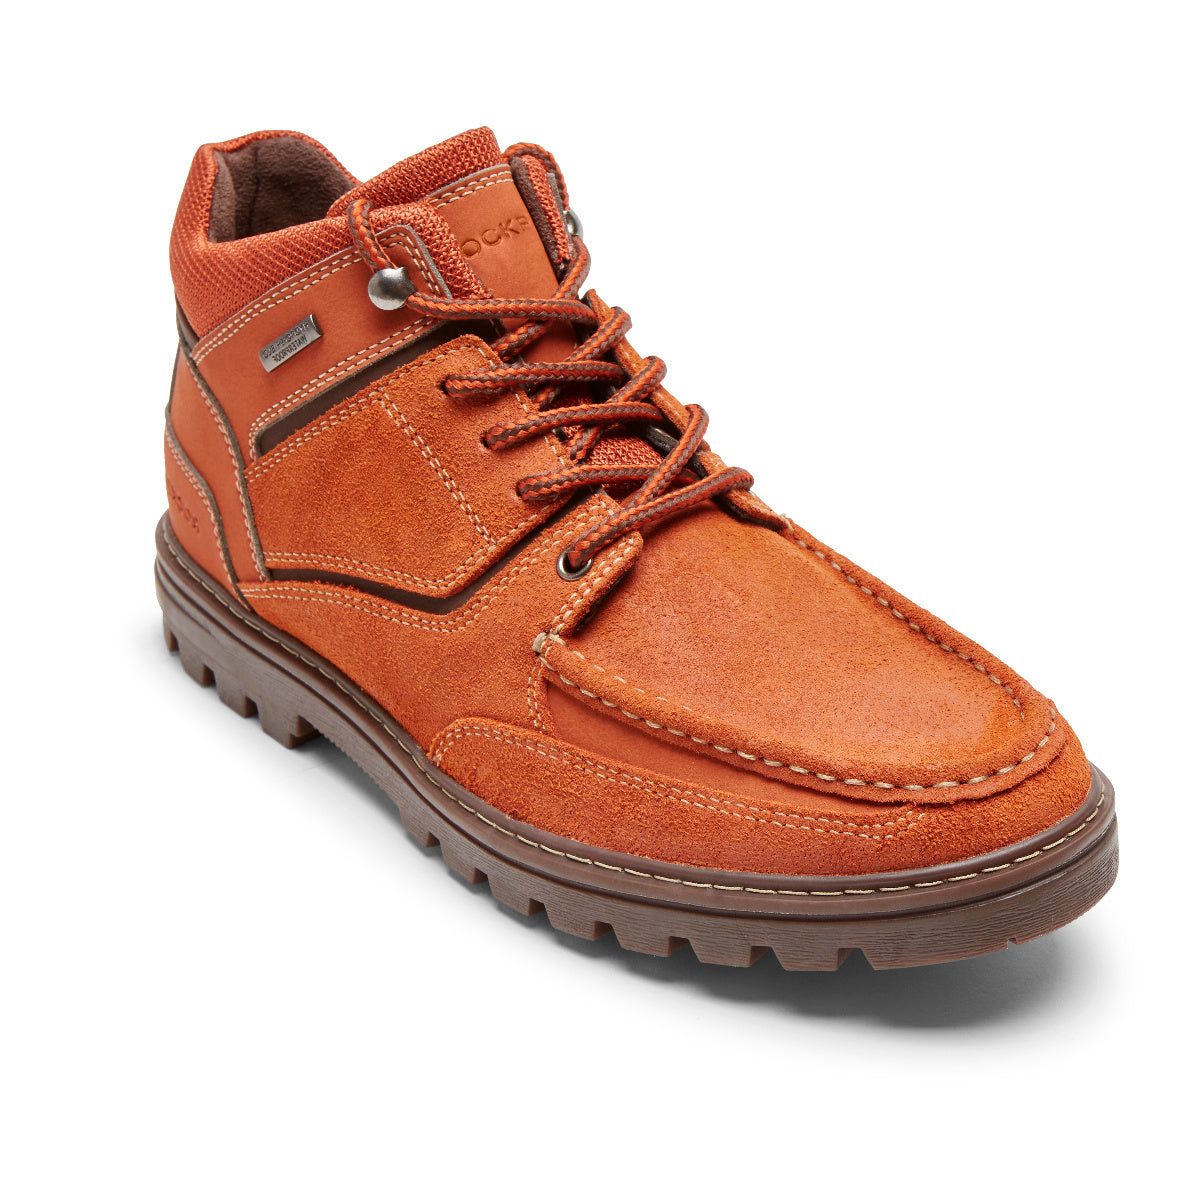 Rockport Mens Weather-Ready Boot ? Waterproof